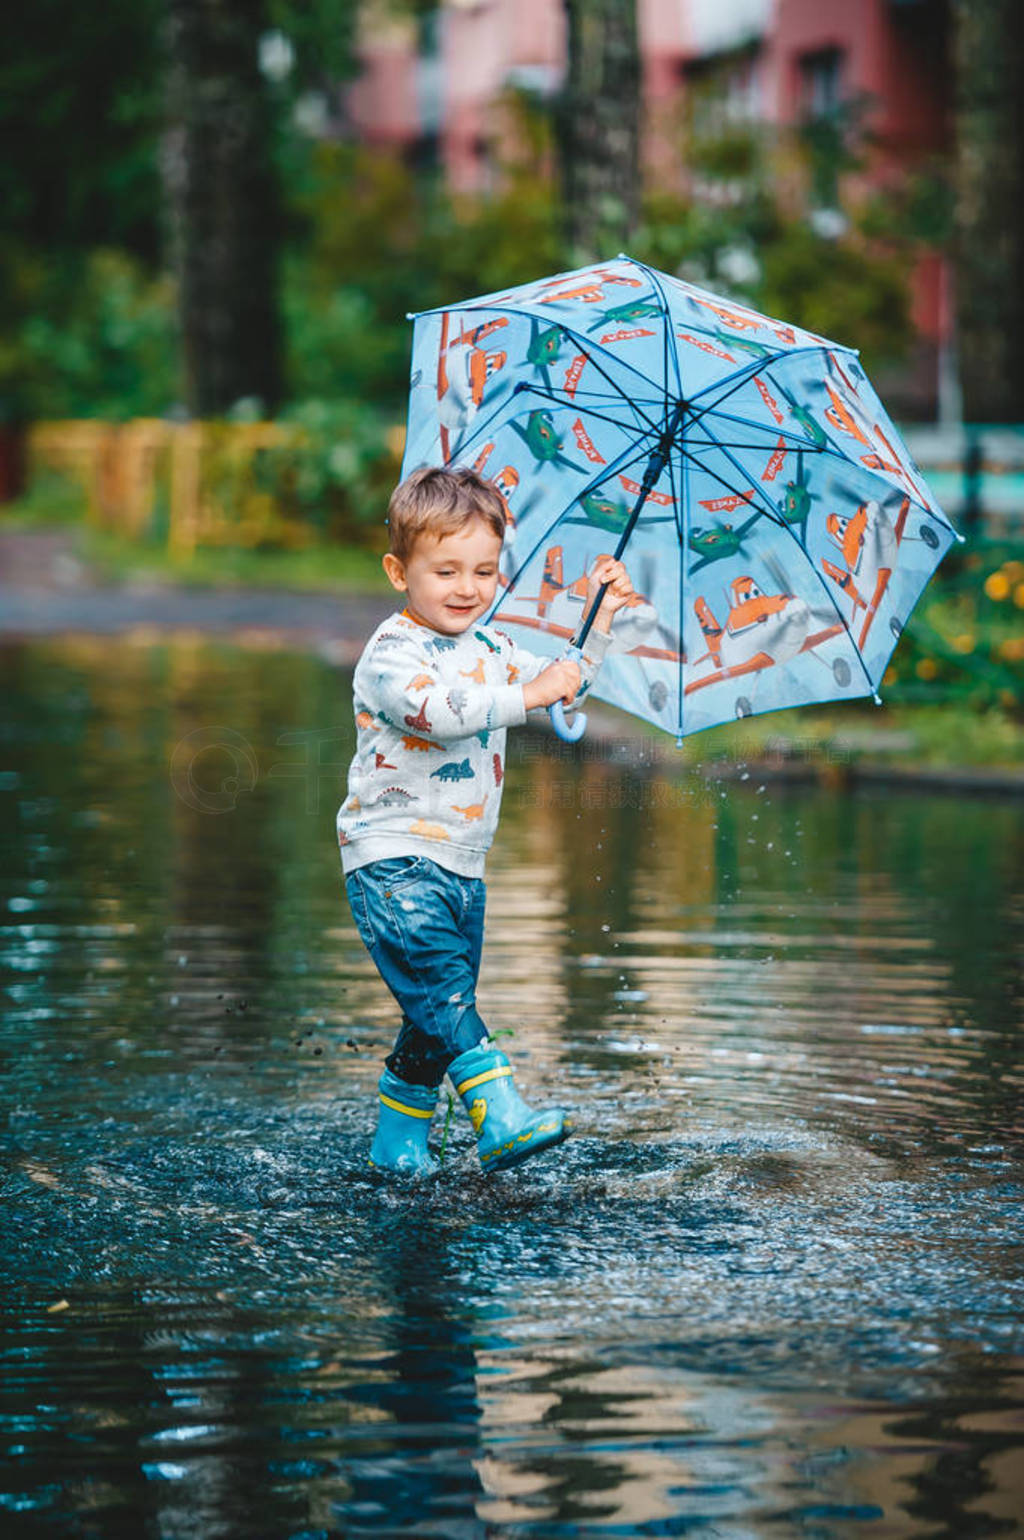 Child with umbrella walking in puddle on rainy weather.